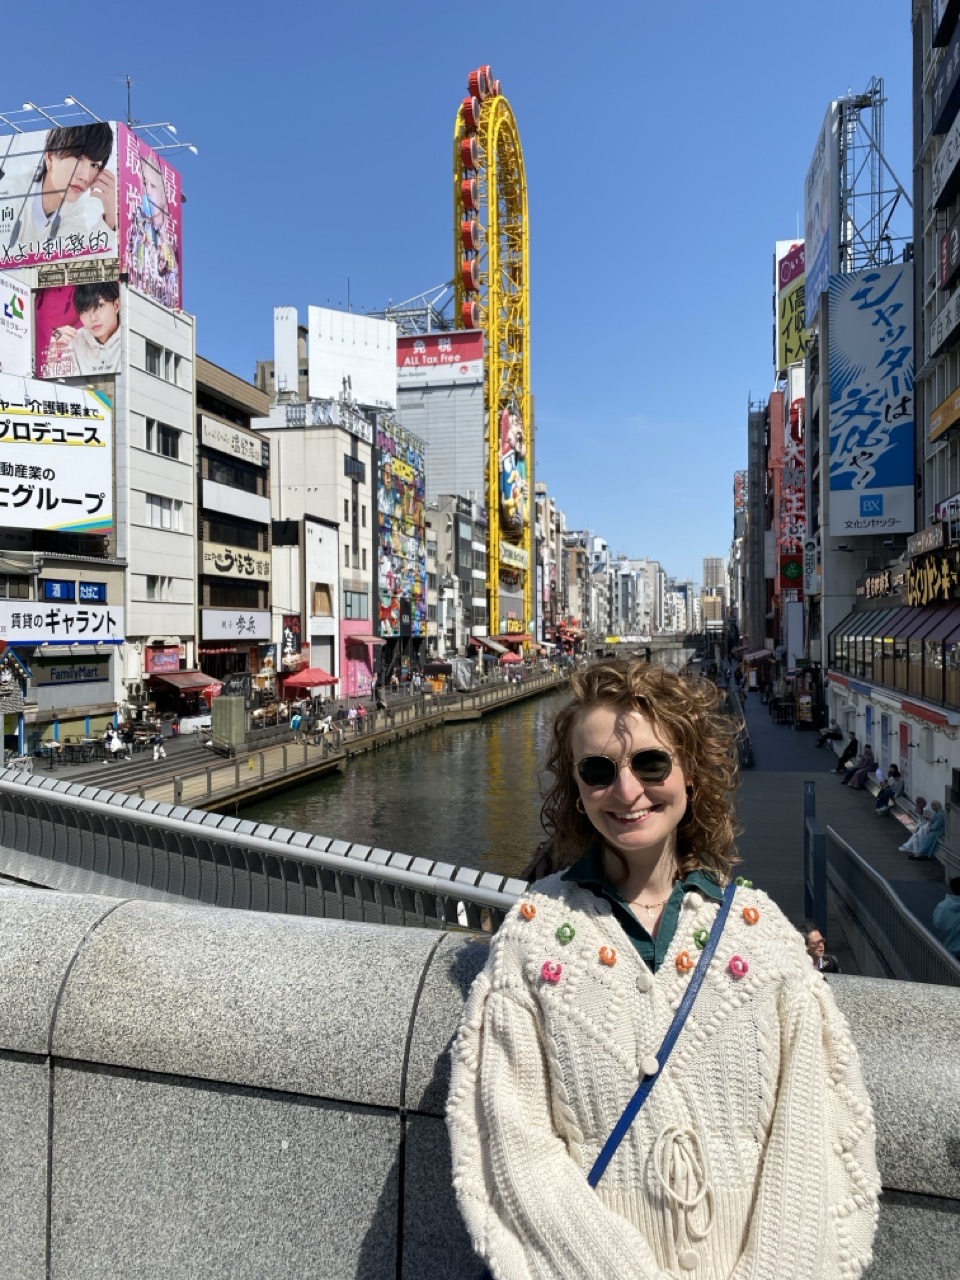 Lucy in Dotenbori. You can see the canal and the big signs